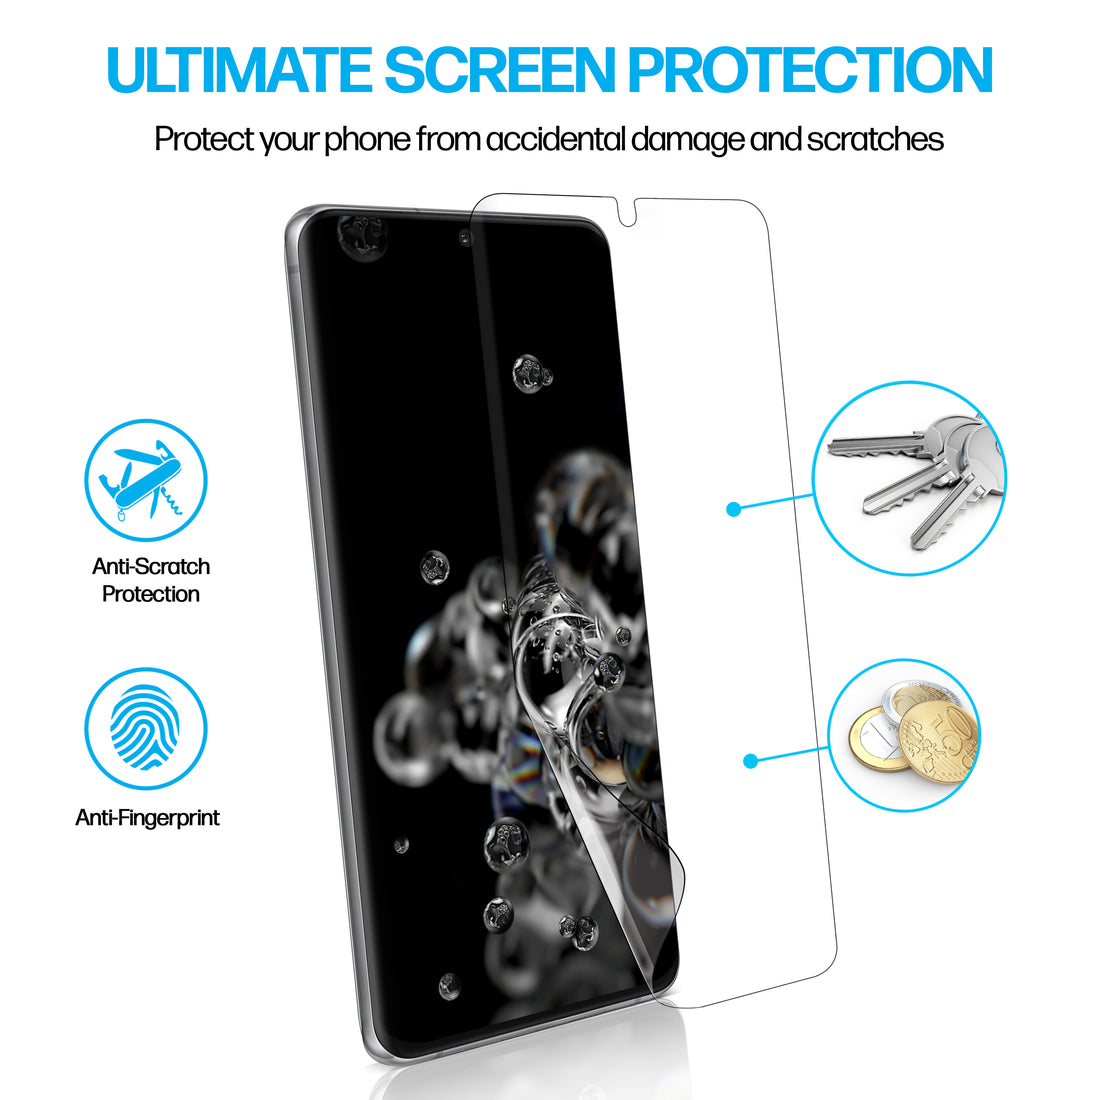 Fortress Curved Screen Protector for Samsung Galaxy S20+ Plus (Not S20/S20  Ultra/FE) with $200 Device Coverage and Precise Installation Tool [Scratch